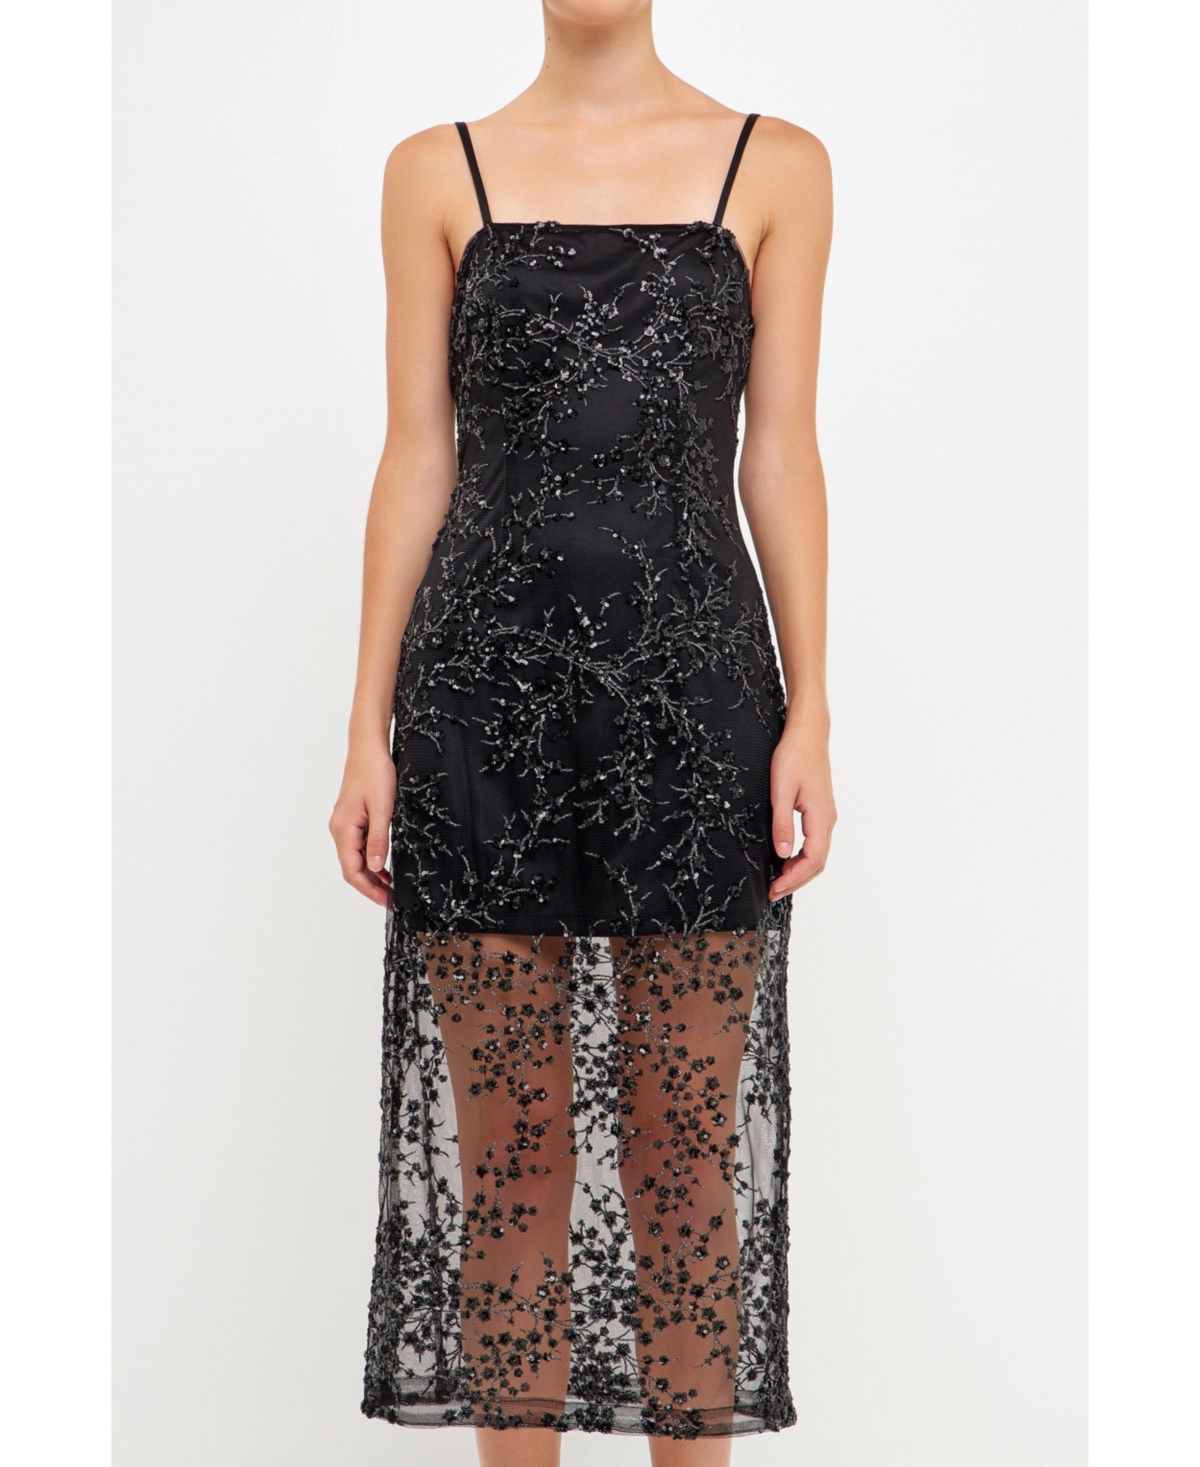 ENDLESS ROSE WOMEN'S SEQUINS EMBROIDERED COCKTAIL DRESS